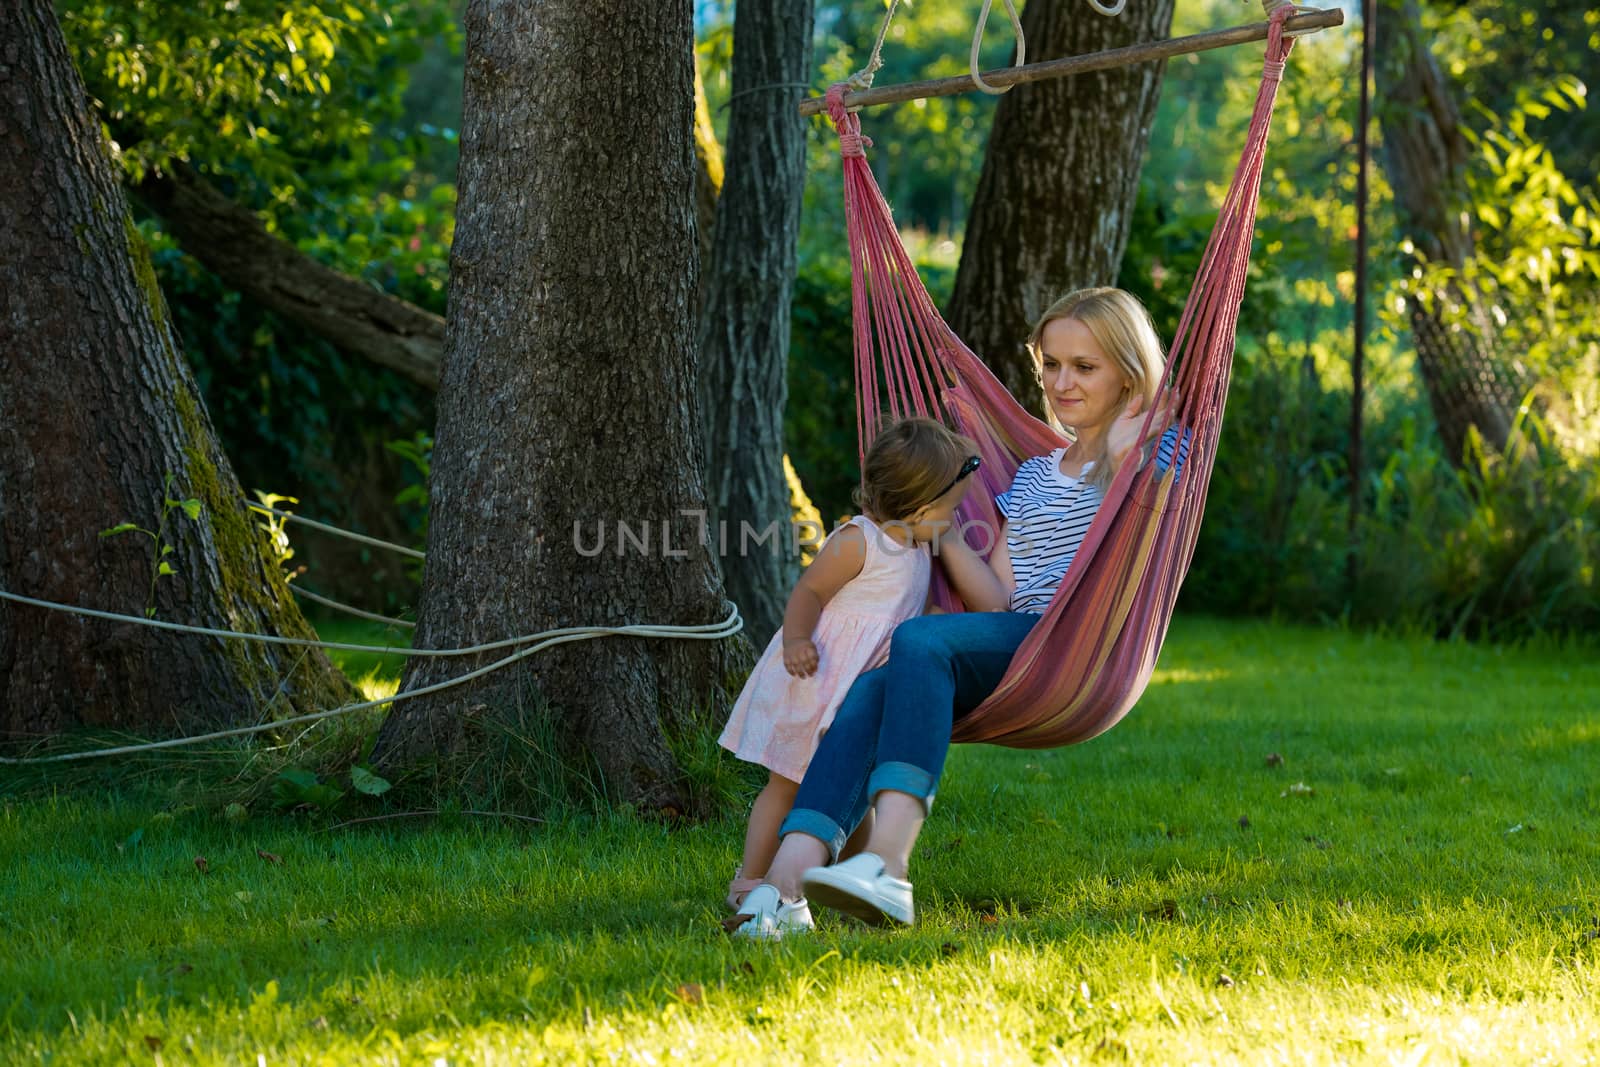 A young woman with a small child is sitting in a hammock in her garden.